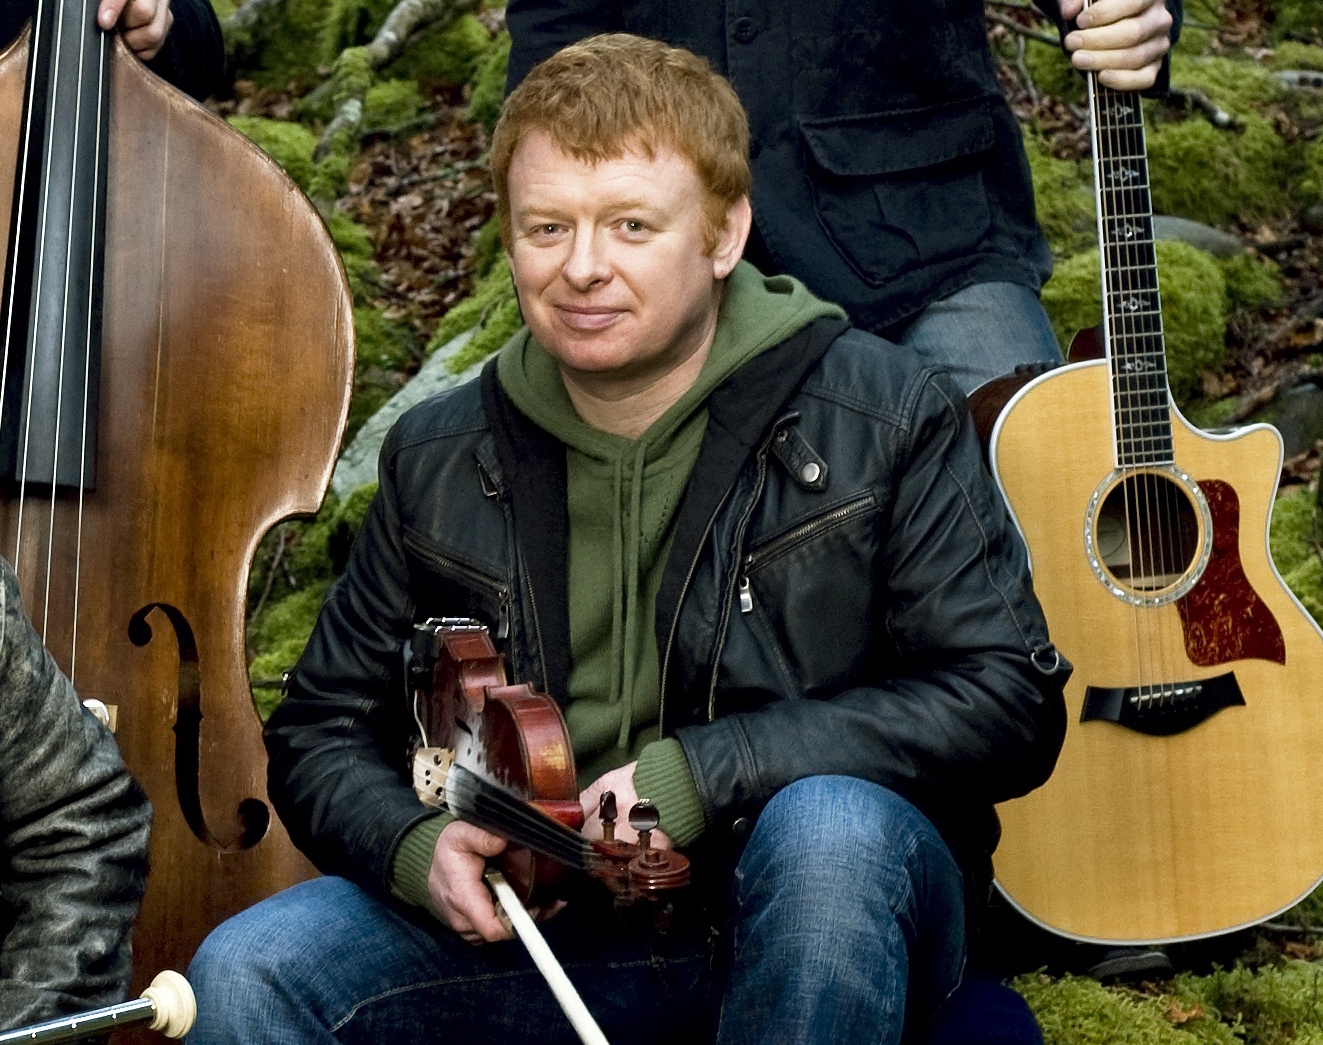 Traditional Music at Galway International Arts Festival